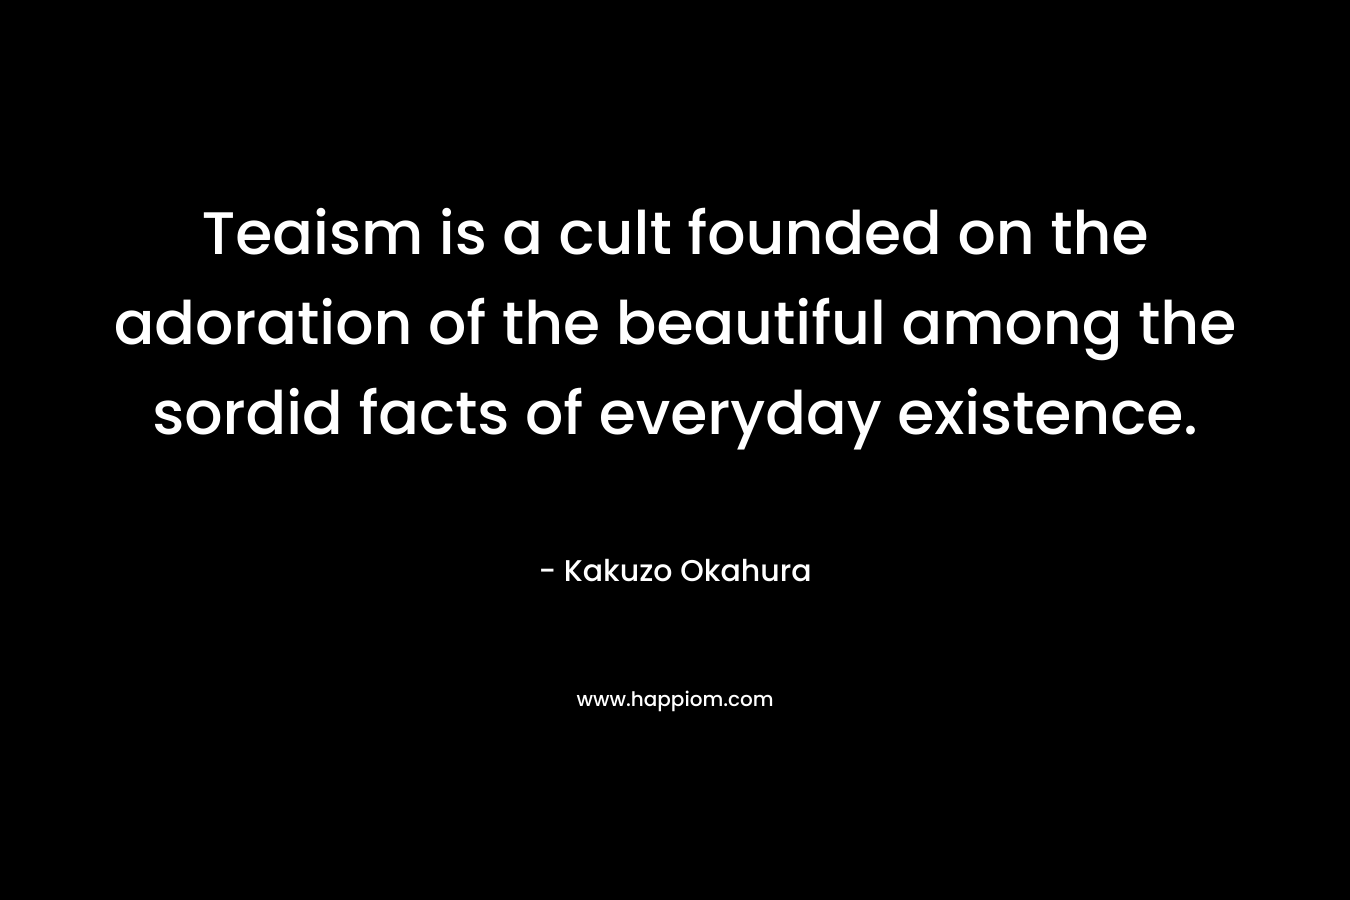 Teaism is a cult founded on the adoration of the beautiful among the sordid facts of everyday existence. – Kakuzo Okahura